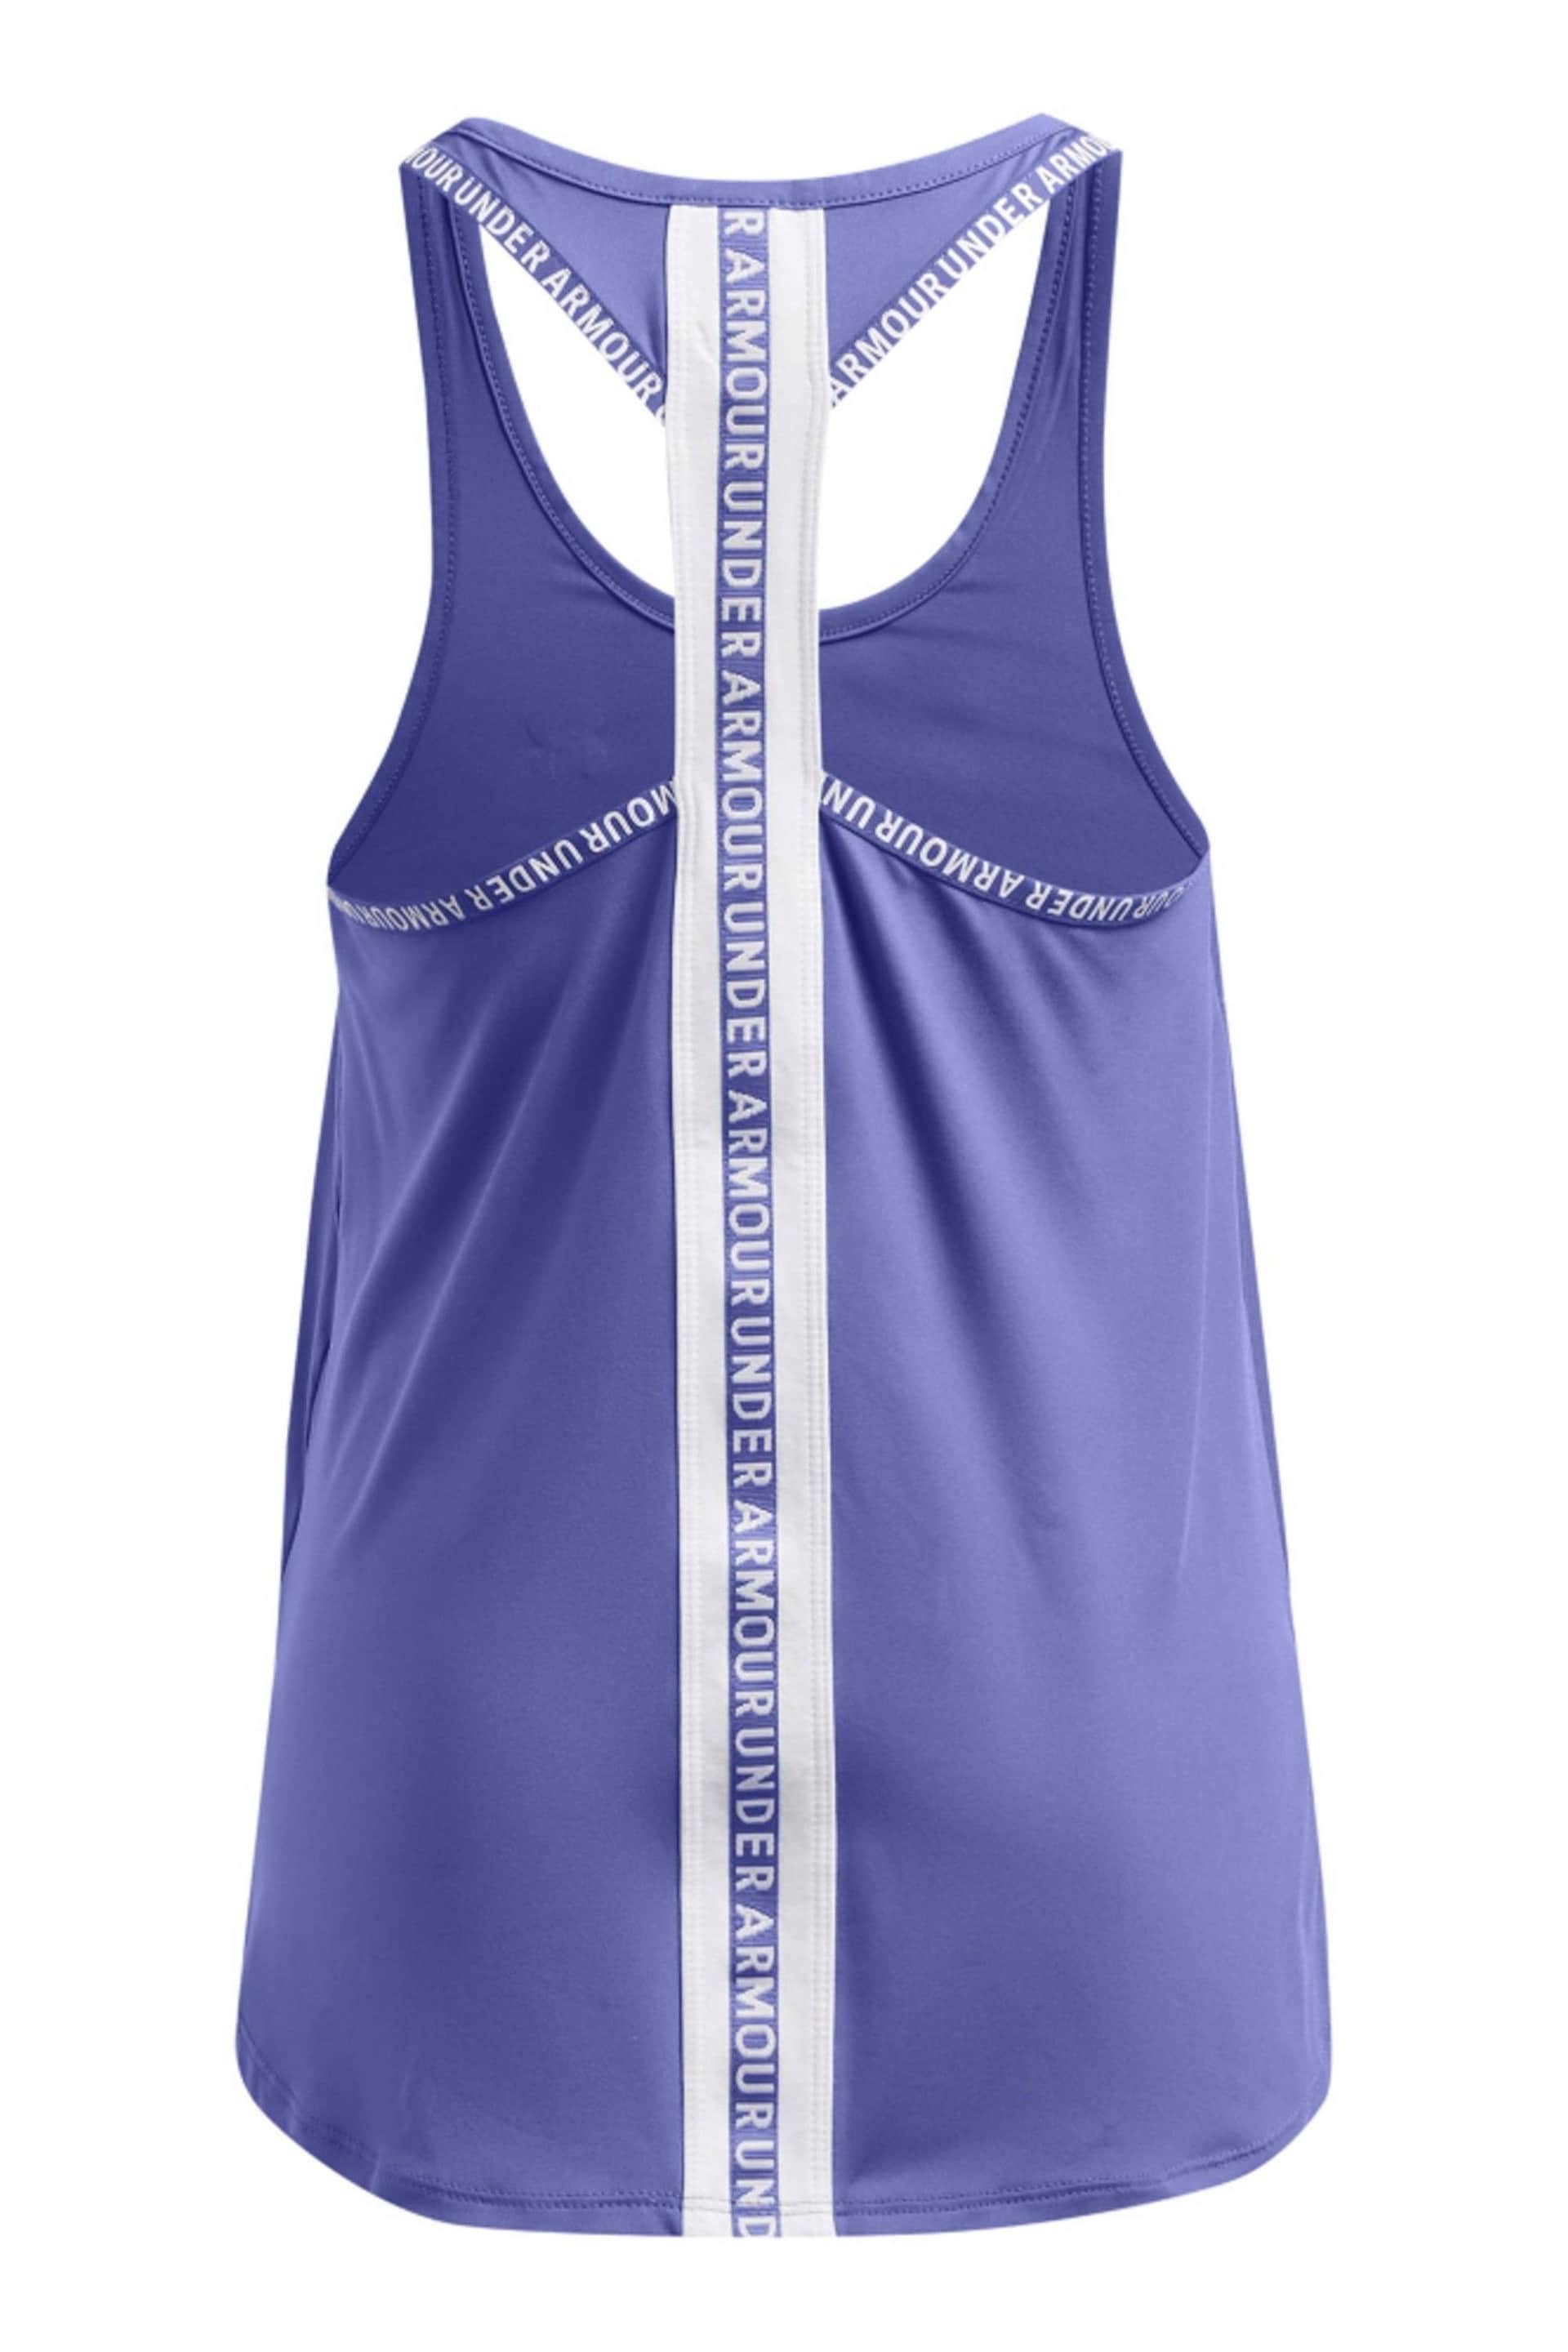 Under Armour Blue Knockout Tank - Image 2 of 2